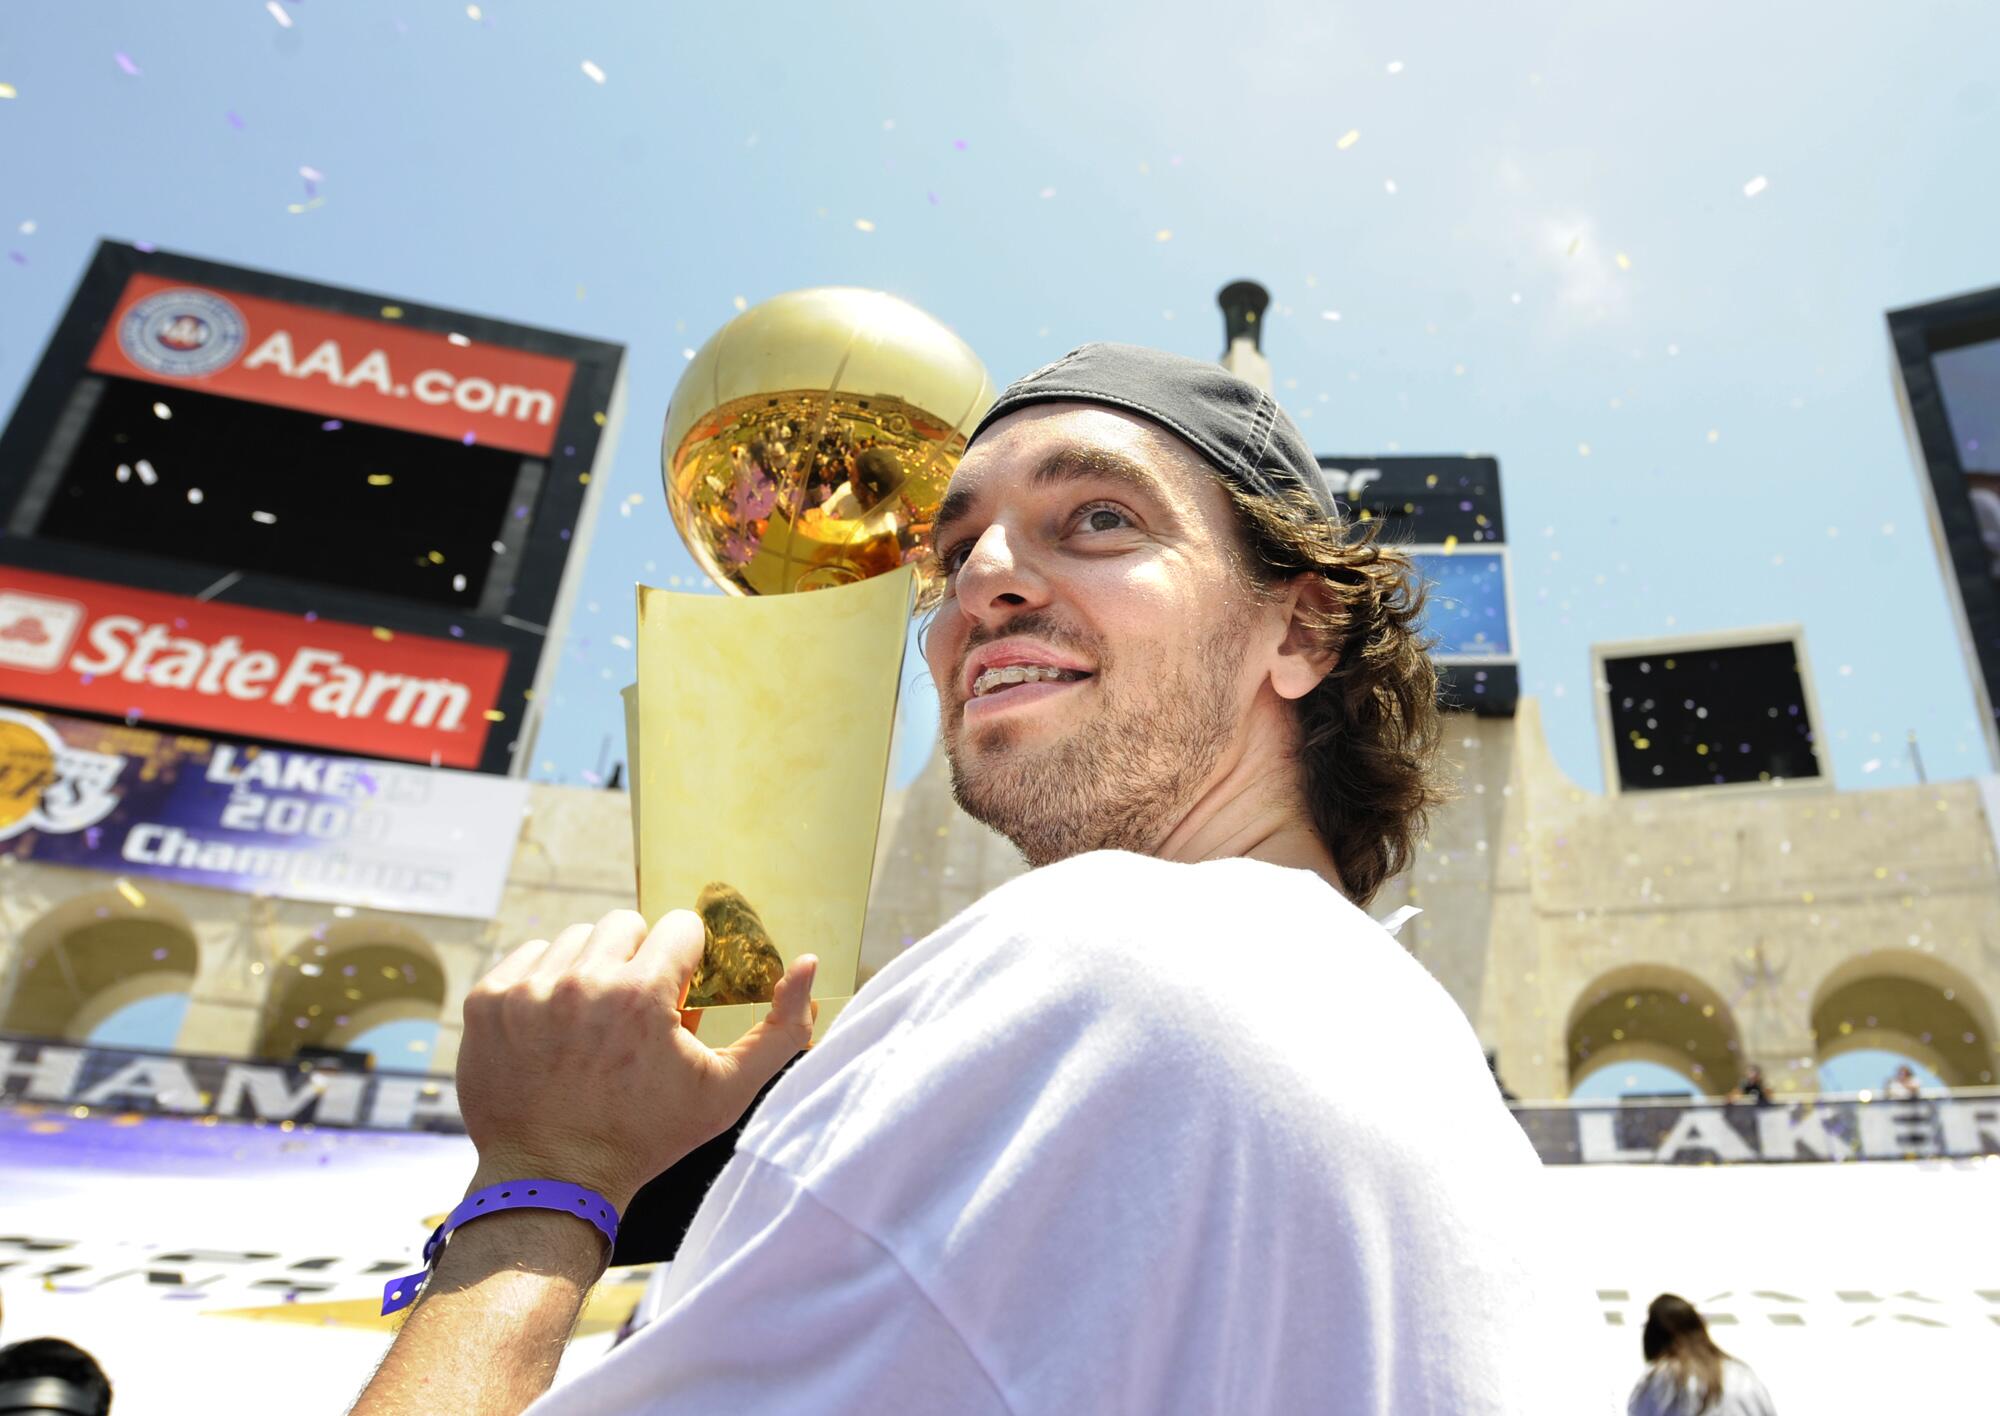 Pau Gasol carries the championship trophy up stairs at the Coliseum following the Lakers' 2009 NBA Championship celebration.